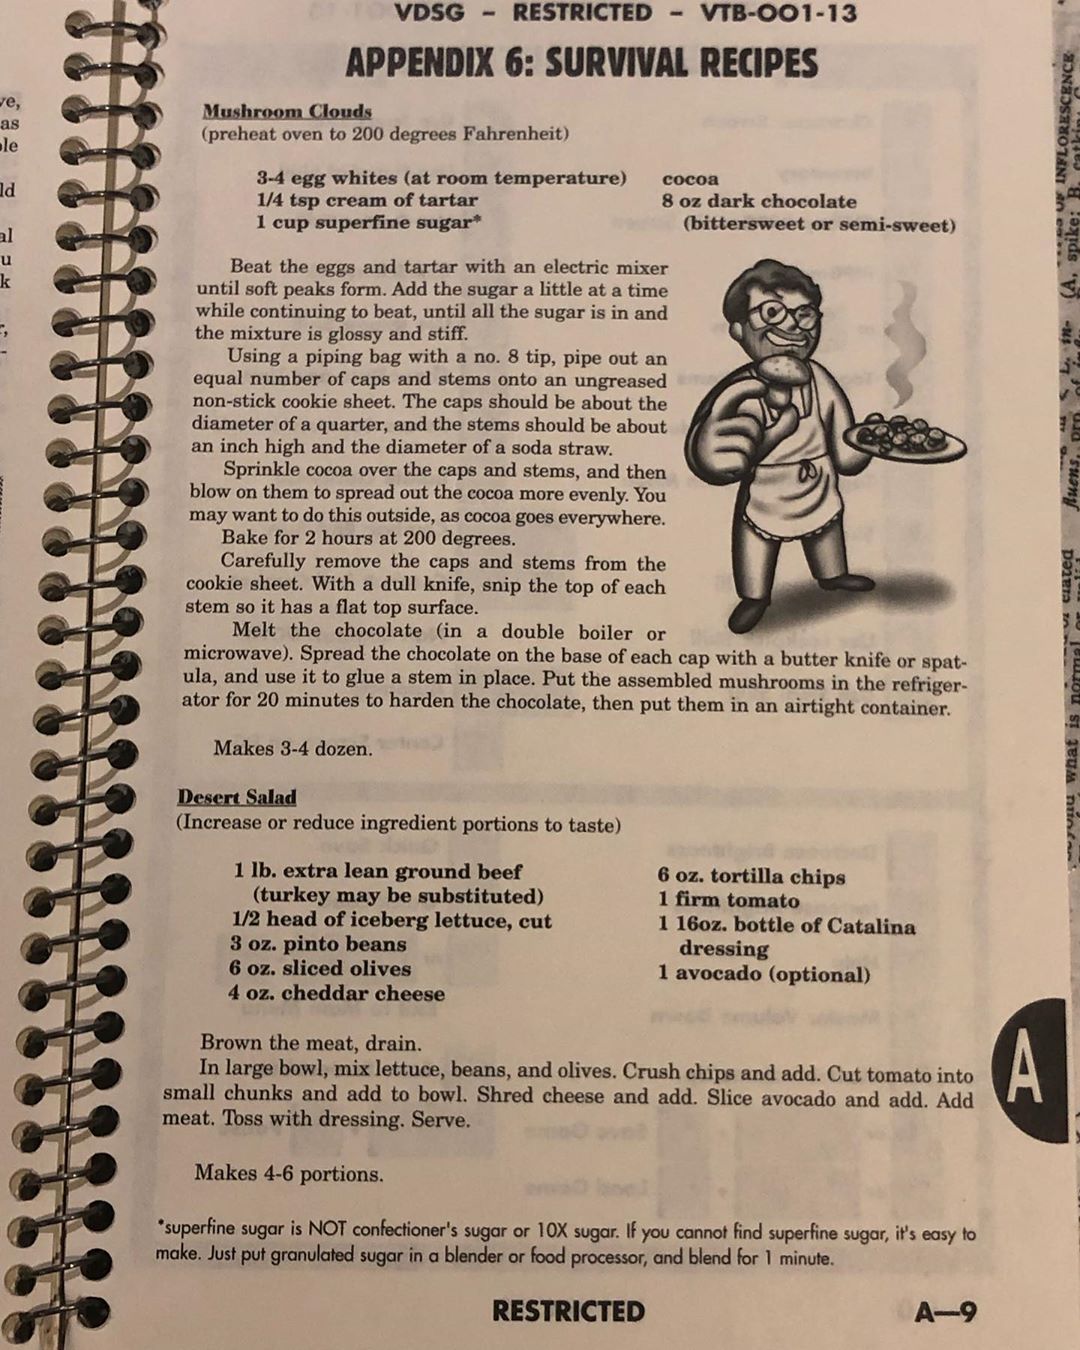 Reminder that the first Fallout’s manual included recipes